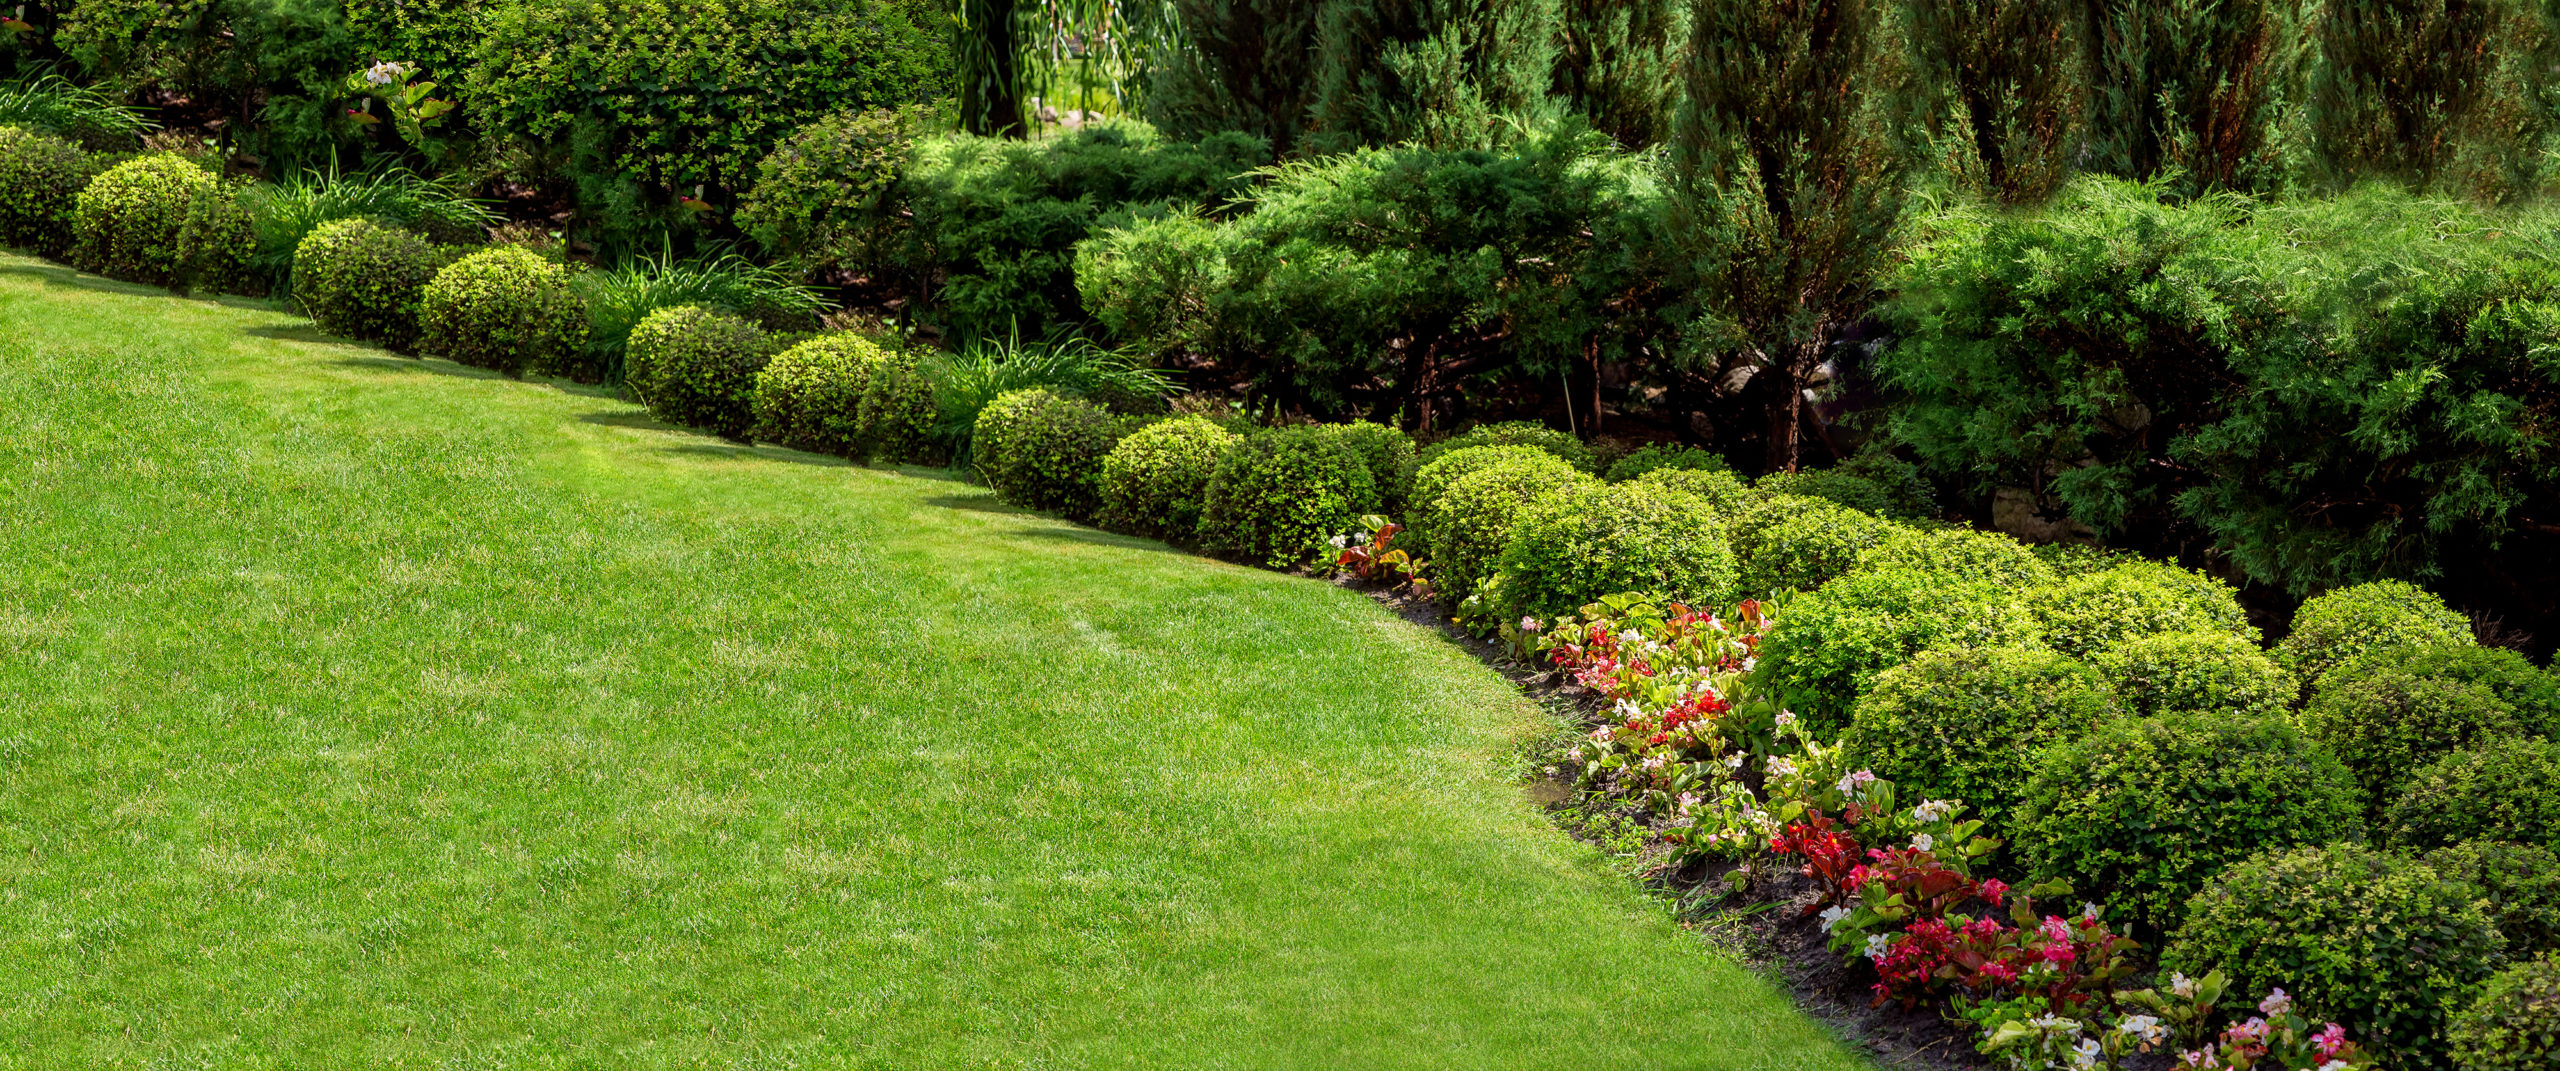 Landscaping Techniques to Improve the Lifespan of your Shrubs and Plants